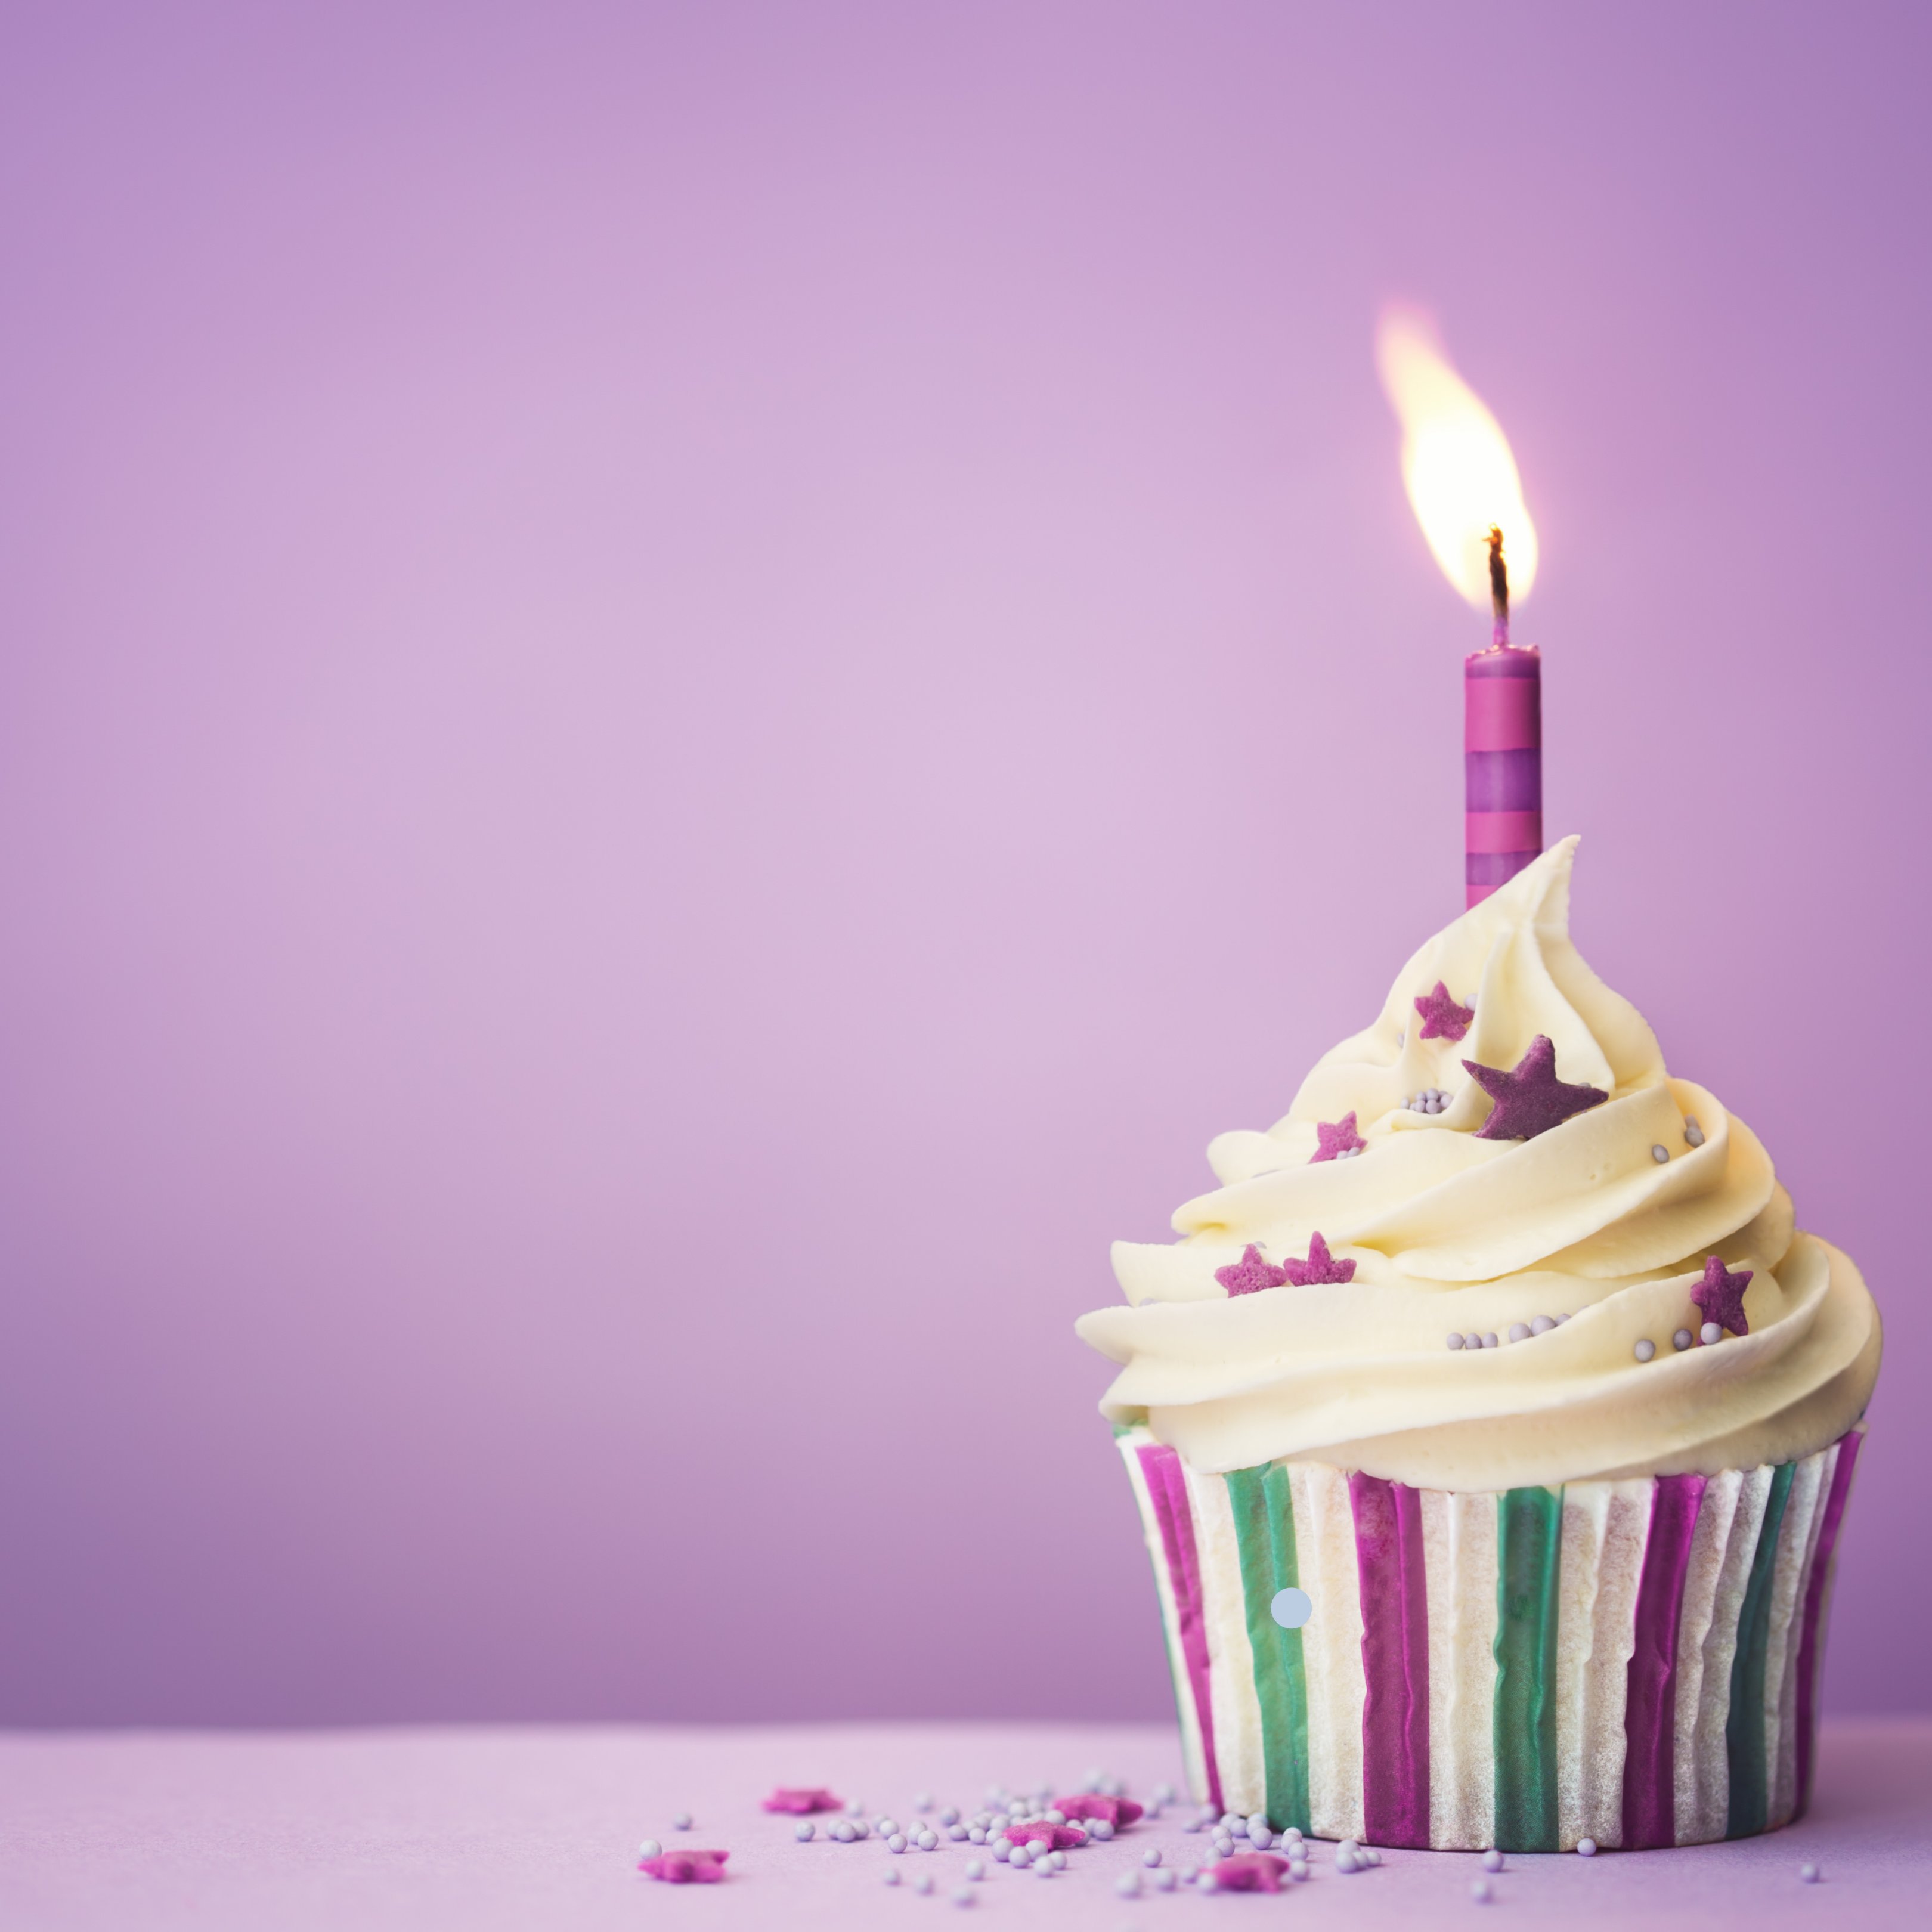 It’s our 4th Birthday….